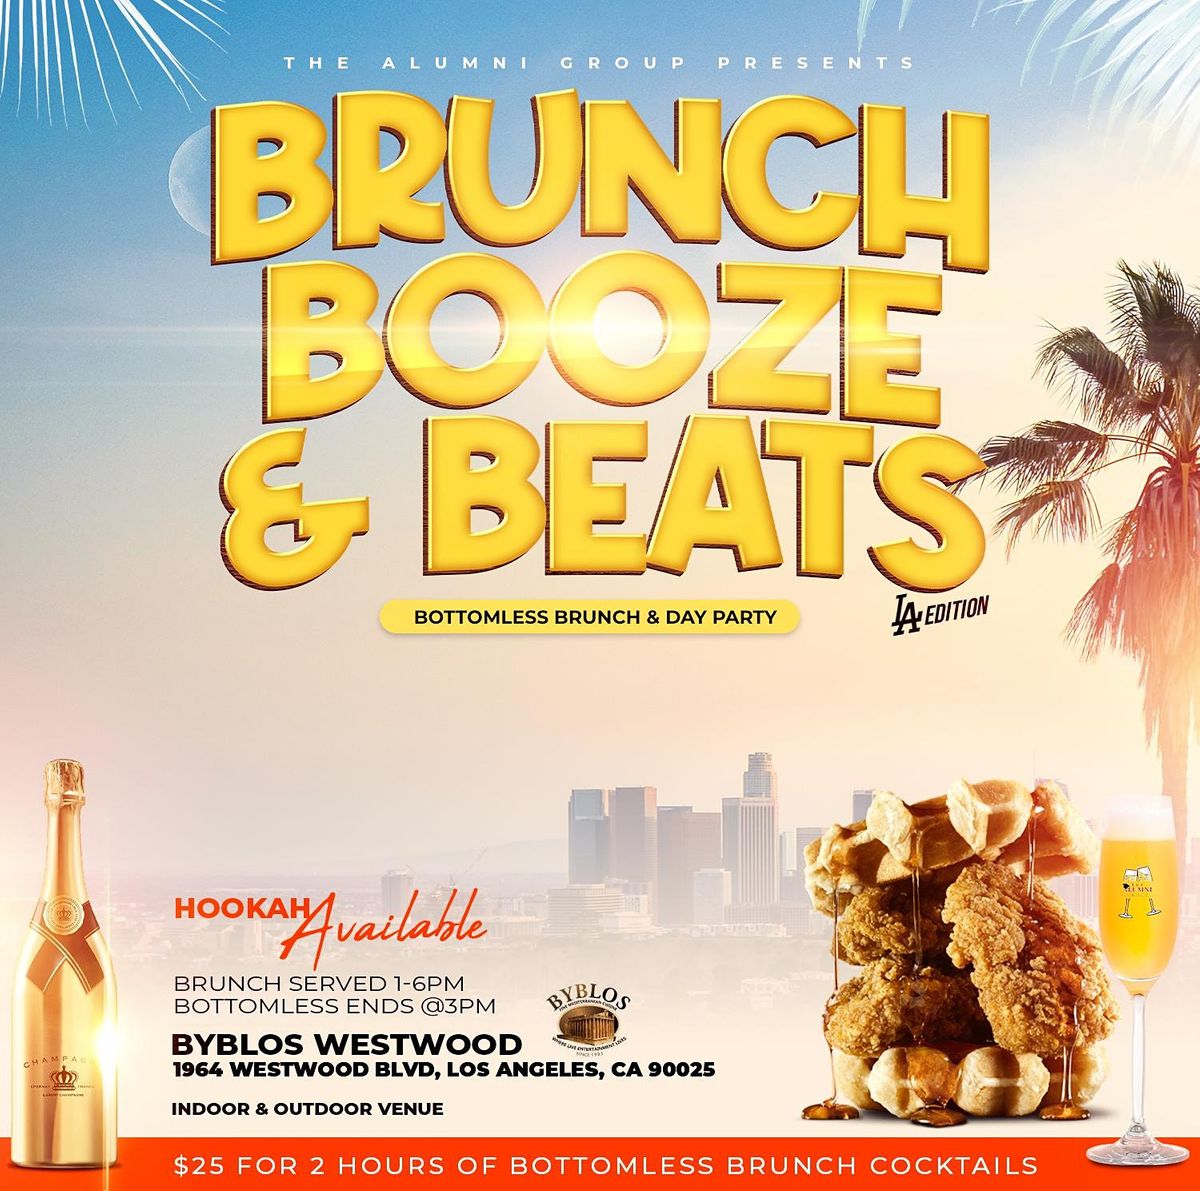 Brunch, Booze, & Beats: Bottomless Brunch & Day Party Independence Weekend